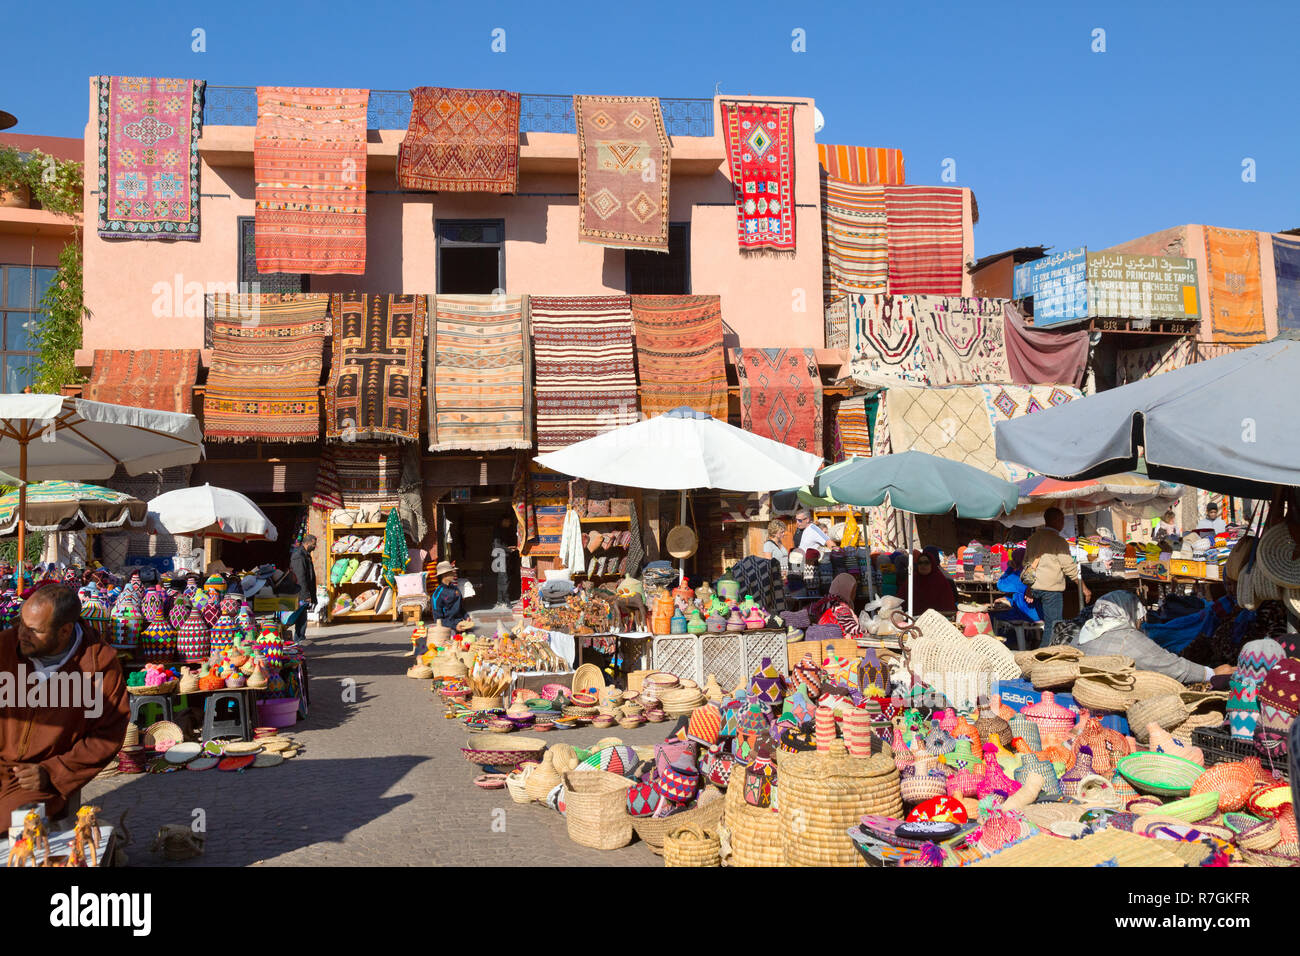 Marrakech souk - colourful goods and carpets for sale in the souks, Marrakech medina, Marrakesh Morocco Africa Stock Photo